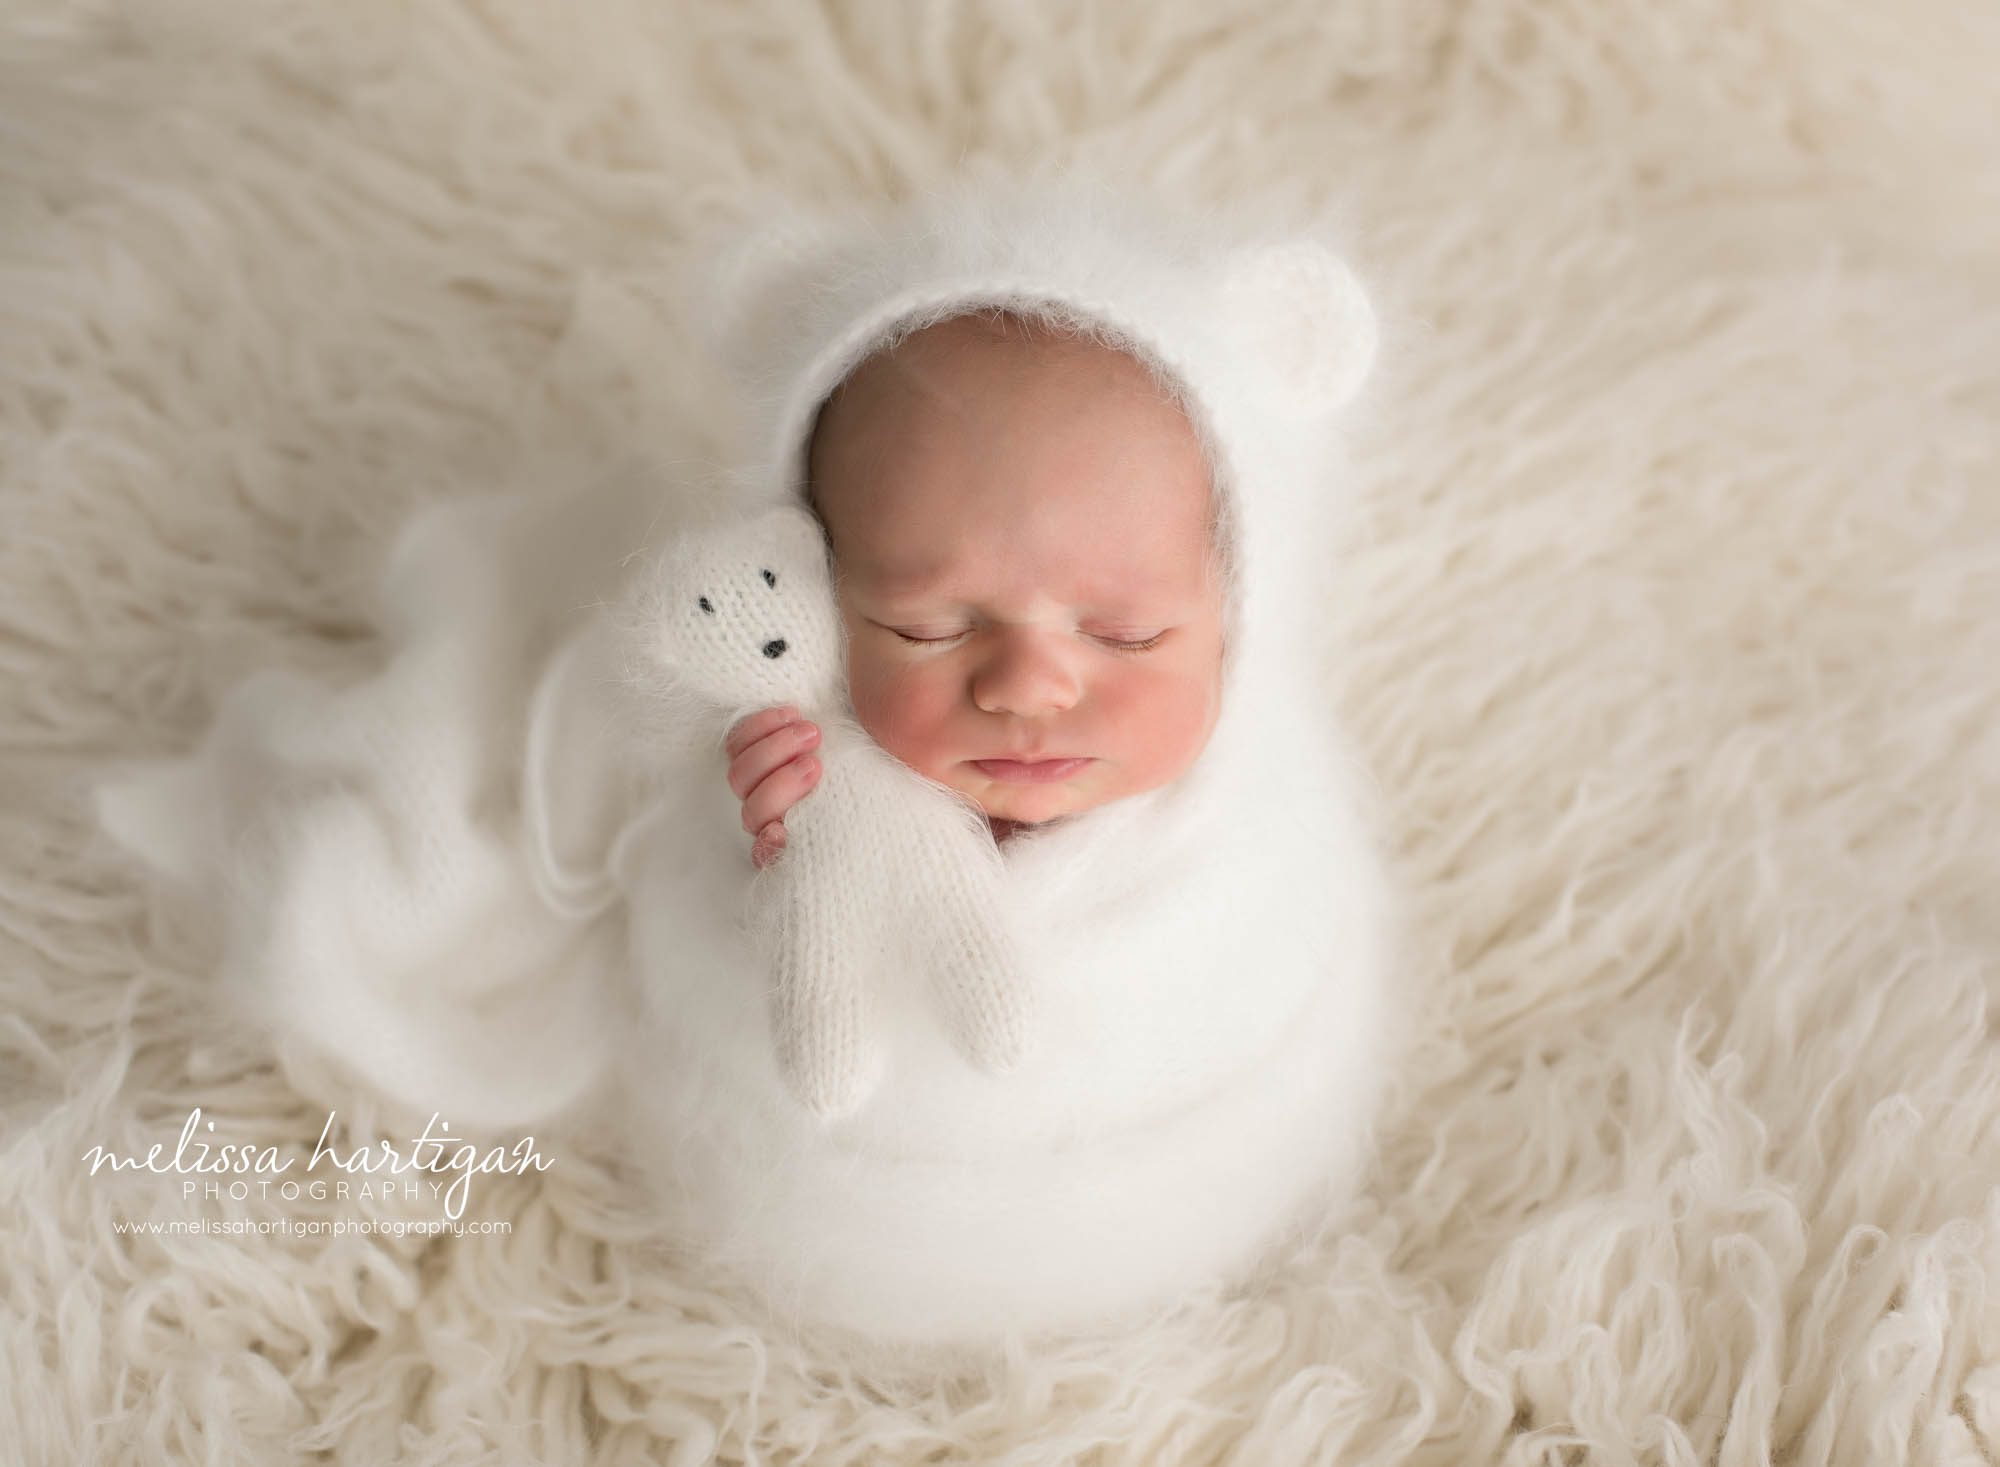 newborn baby boy wrapped in knitted wrap white posed on cream flokati